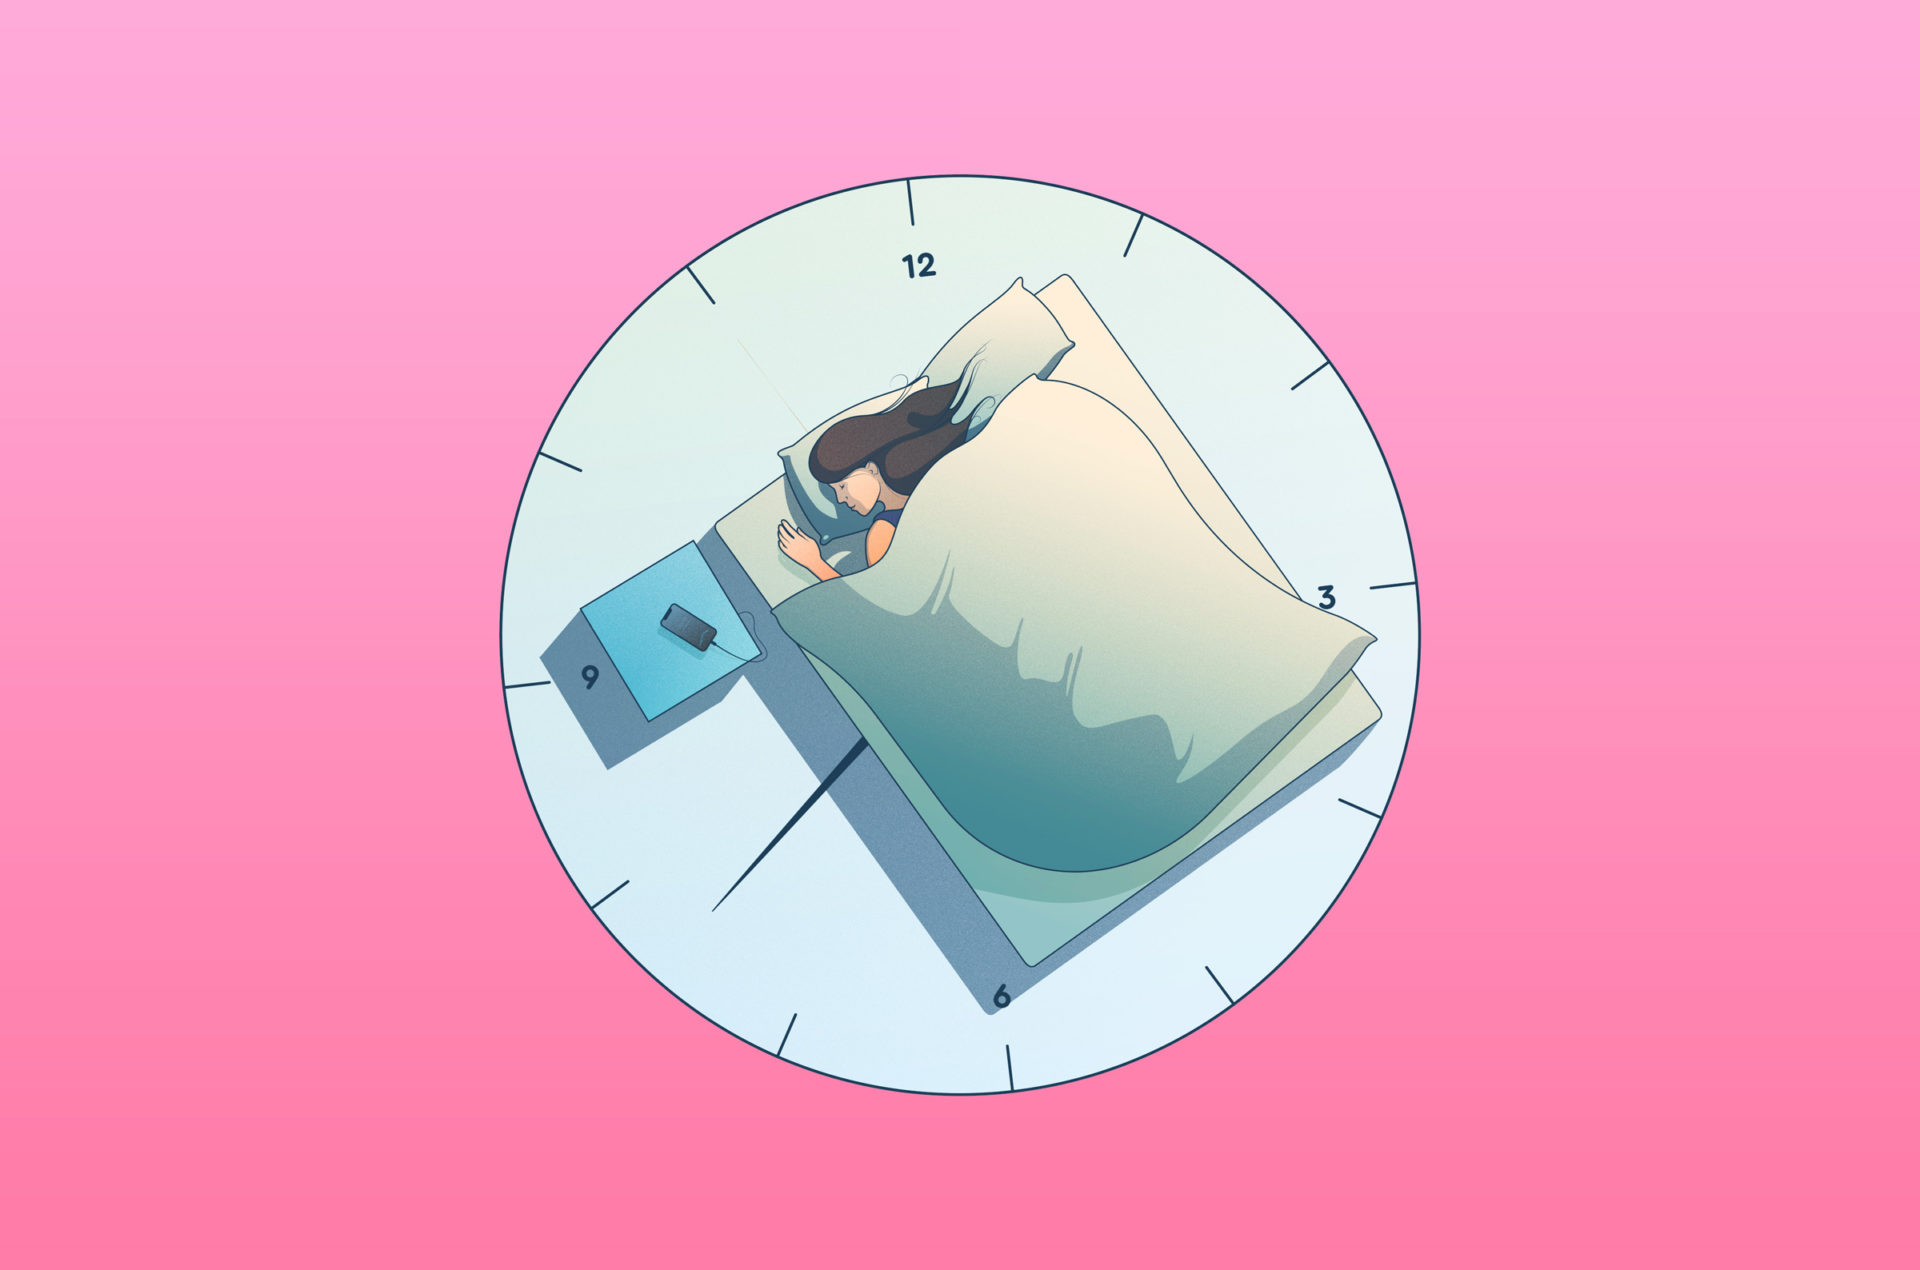 visual showing a women sleeping on a clock - representing how much sleep we need